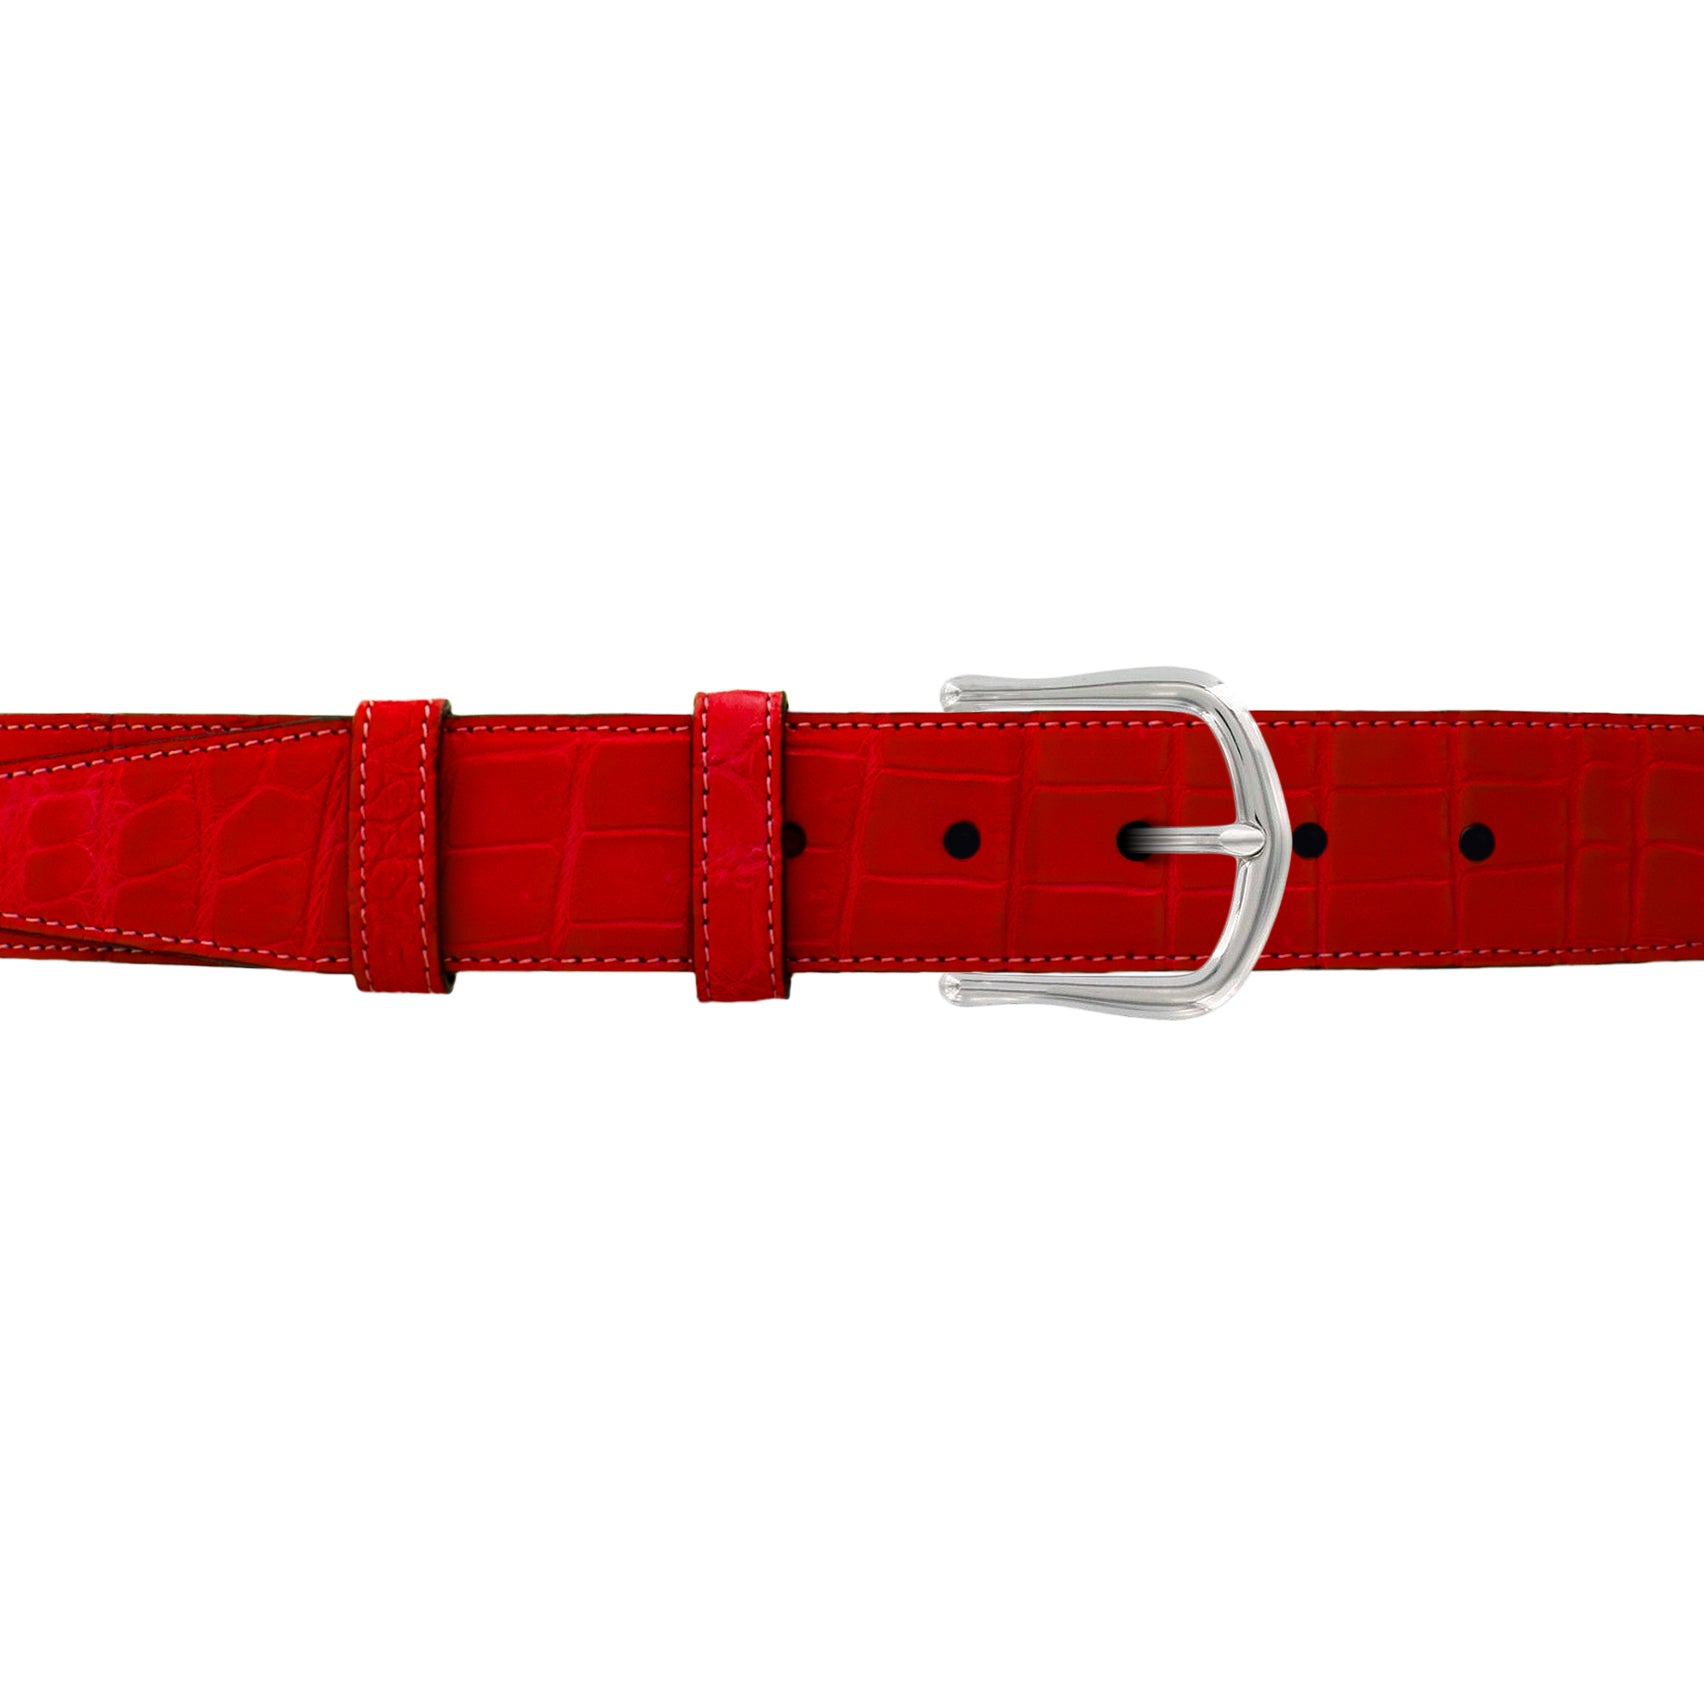 1 1/2" Candy Seasonal Belt with Derby Cocktail Buckle in Polished Nickel